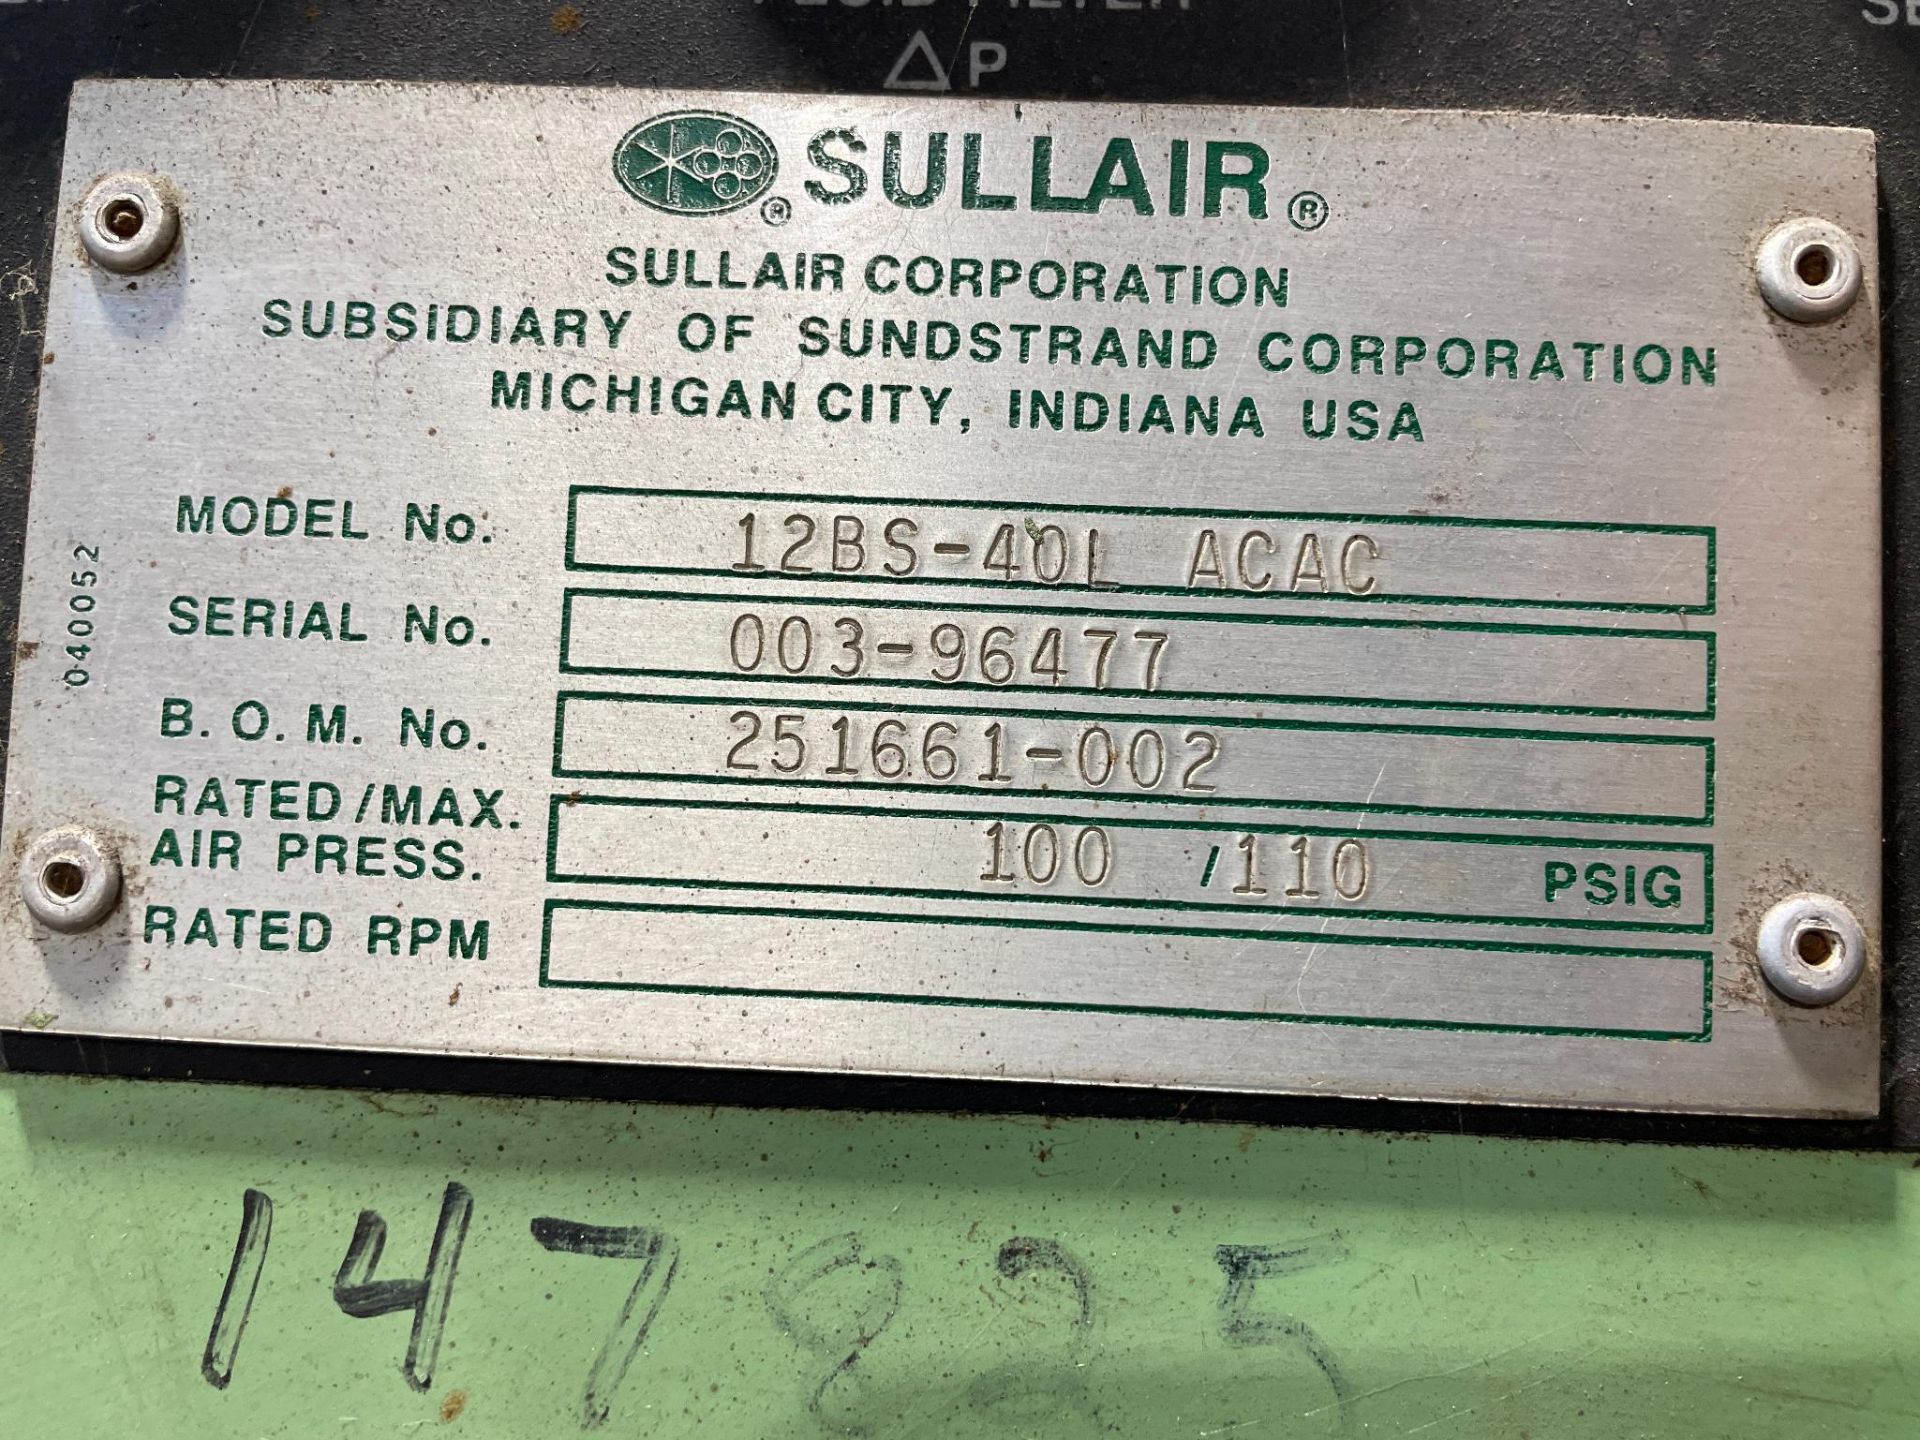 AIR COMPRESSOR, SULLAIR MDL. 12BS-401 ACAC,, 100/110 psig, 40 HP, 200/ 400 v., S/N 003-96477, BOM - Image 2 of 6